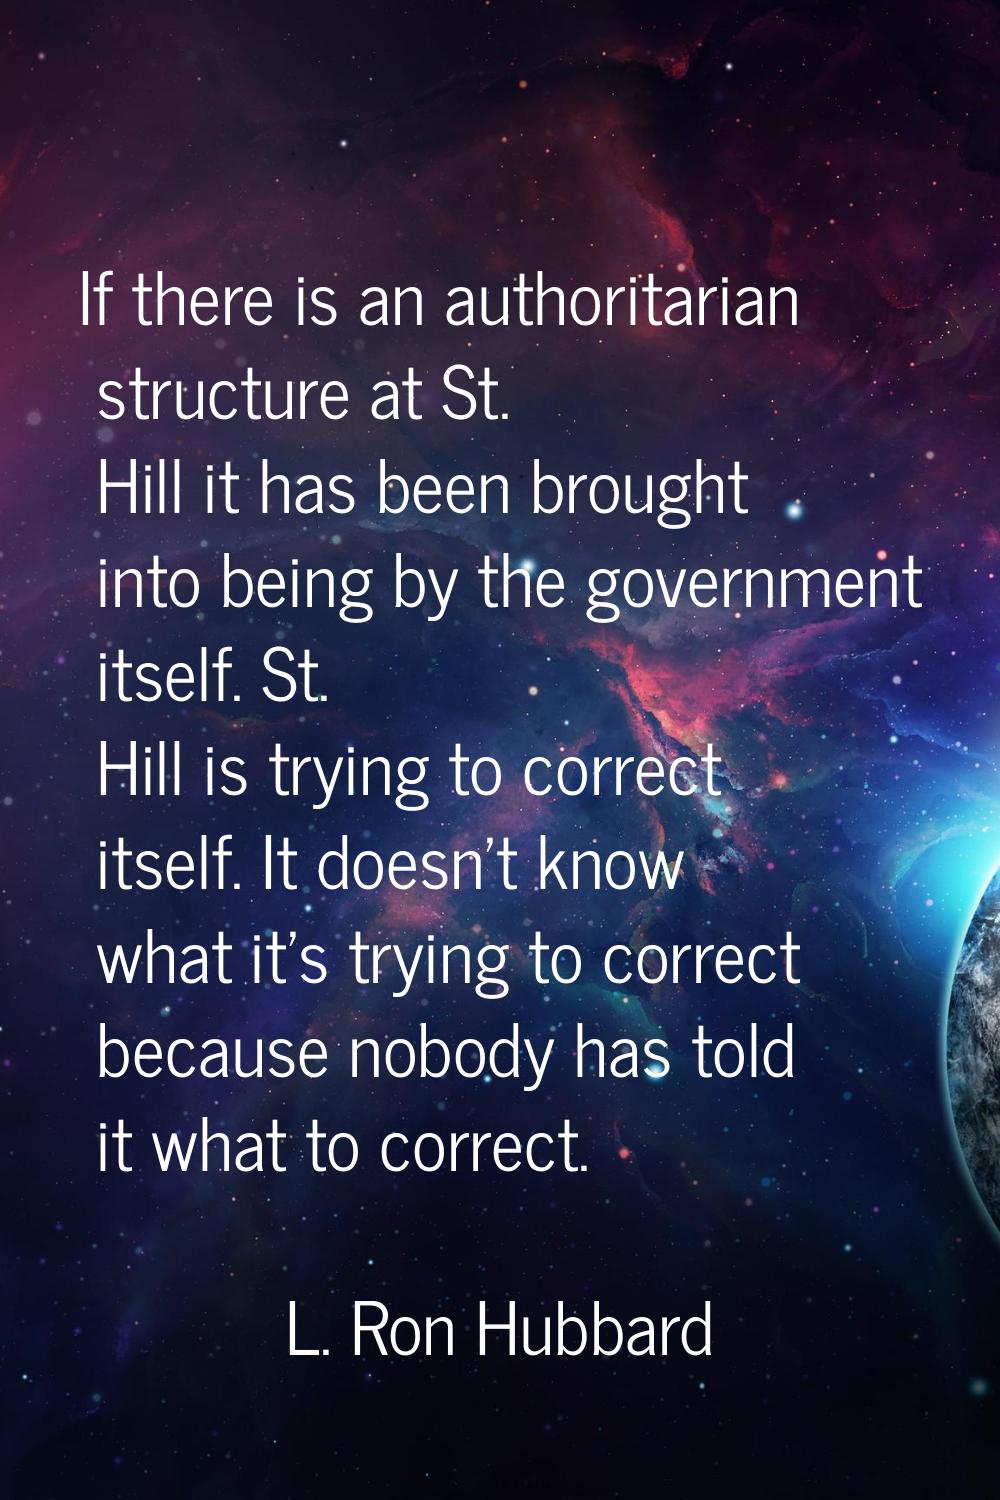 If there is an authoritarian structure at St. Hill it has been brought into being by the government